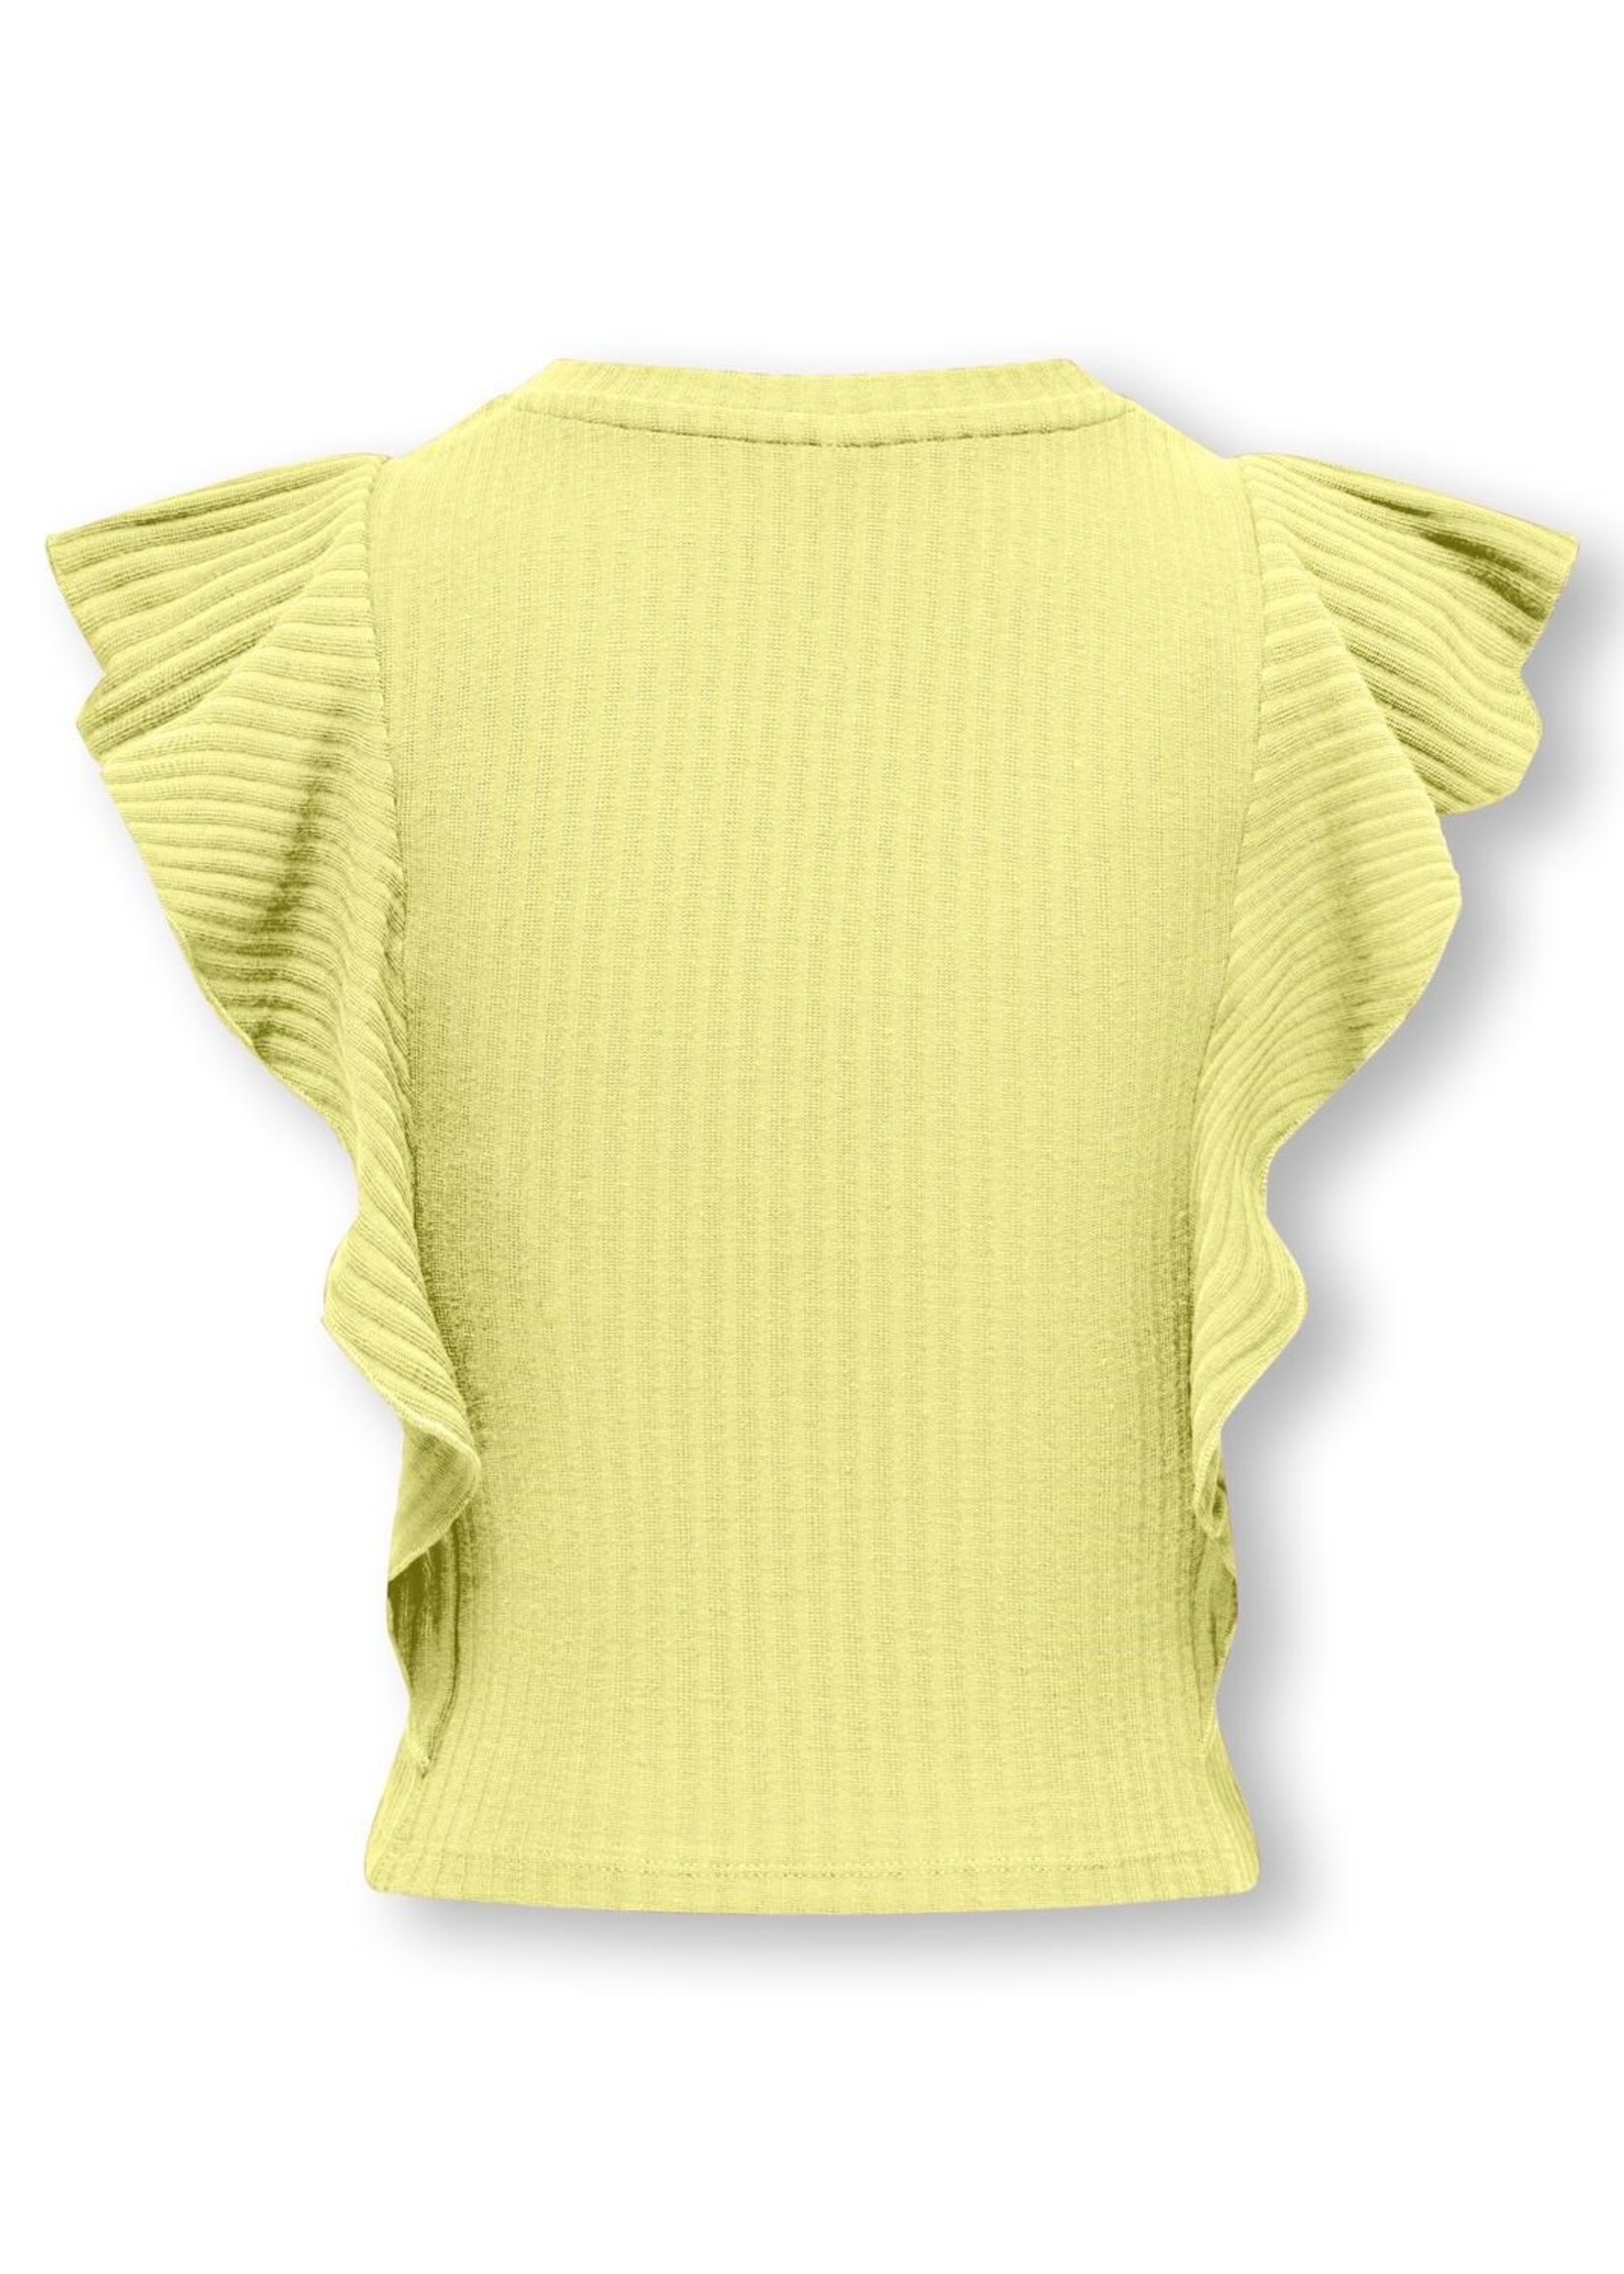 KIDS ONLY Nella Short Ruffle Top Yellow Pear 15291900